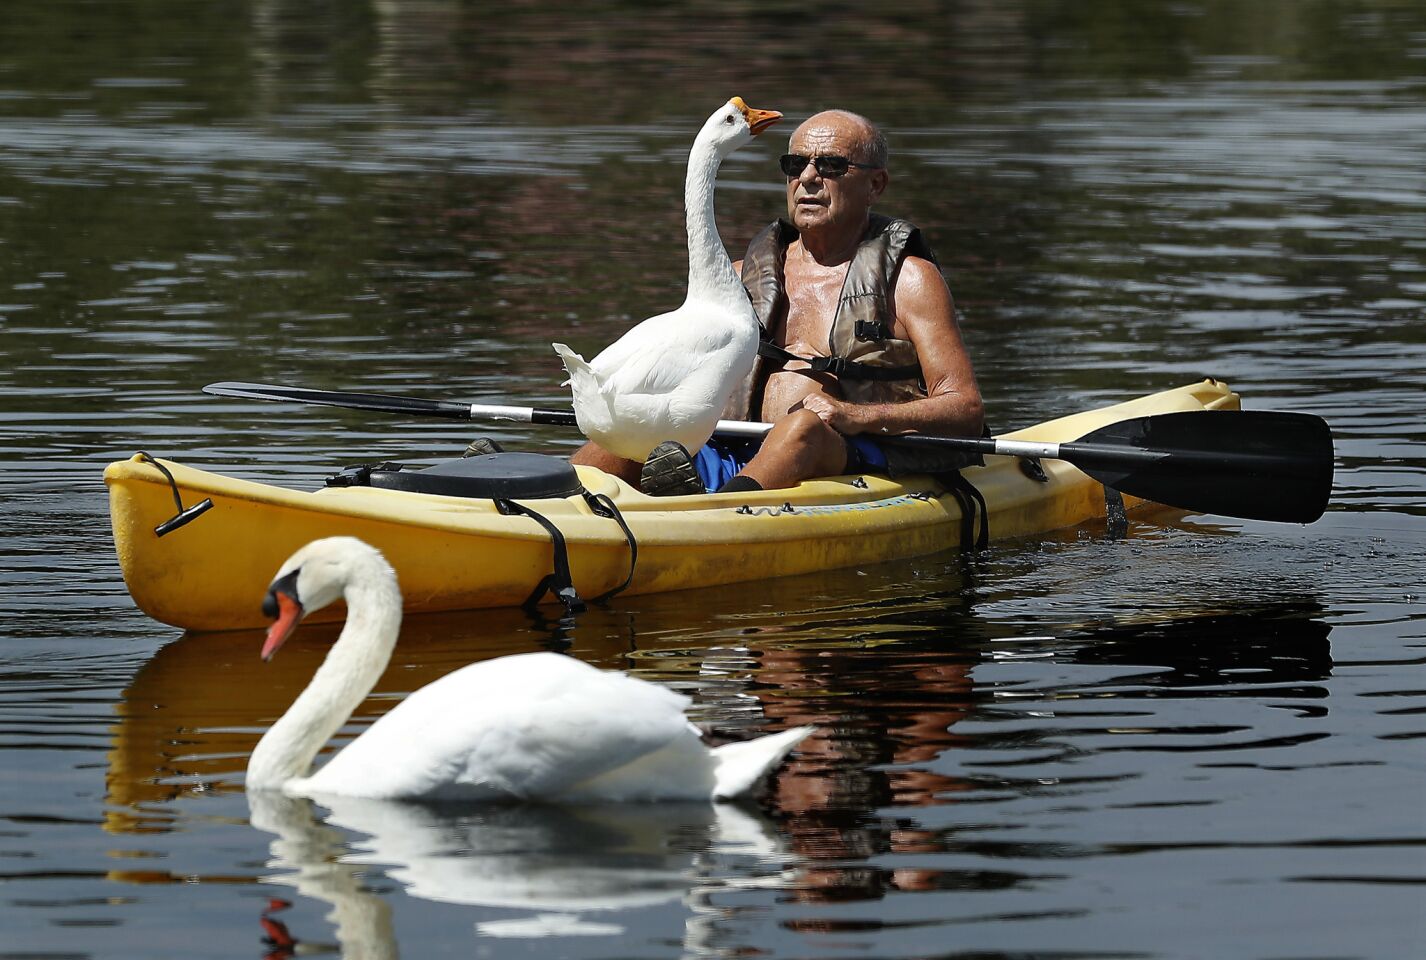 Gary Snyder rides a kayak with what he believes is a gander that he befriended at Lake Balboa in Van Nuys. Snyder said that he first met the bird while walking around the lake about a month ago. He said that since then, the gander joins him for rides about twice a week.